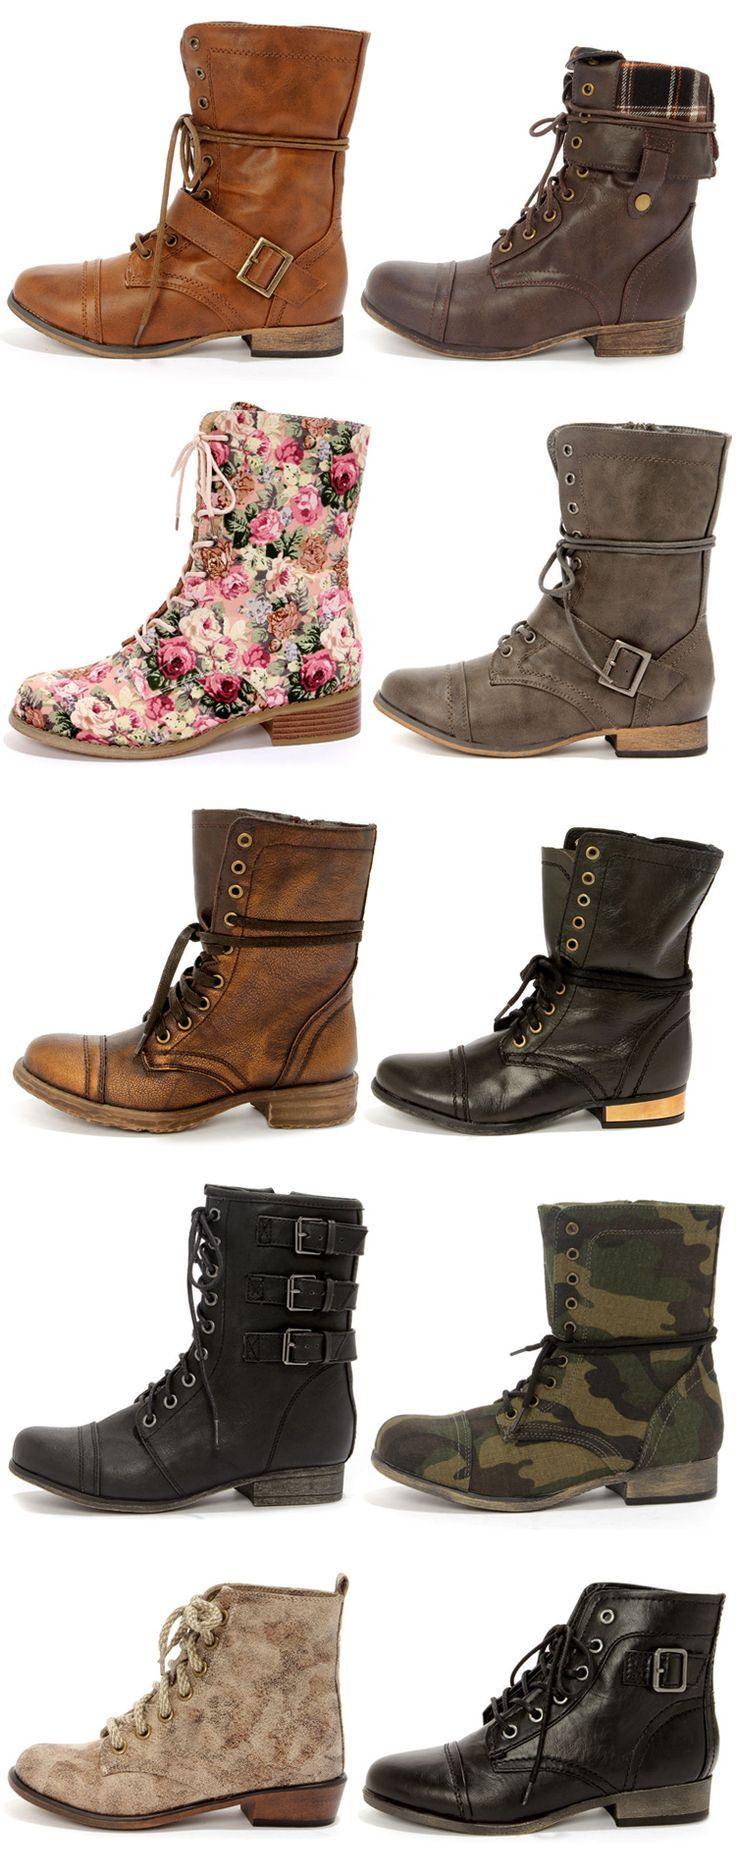 Wedding - Different Kinds Of Boots For Women